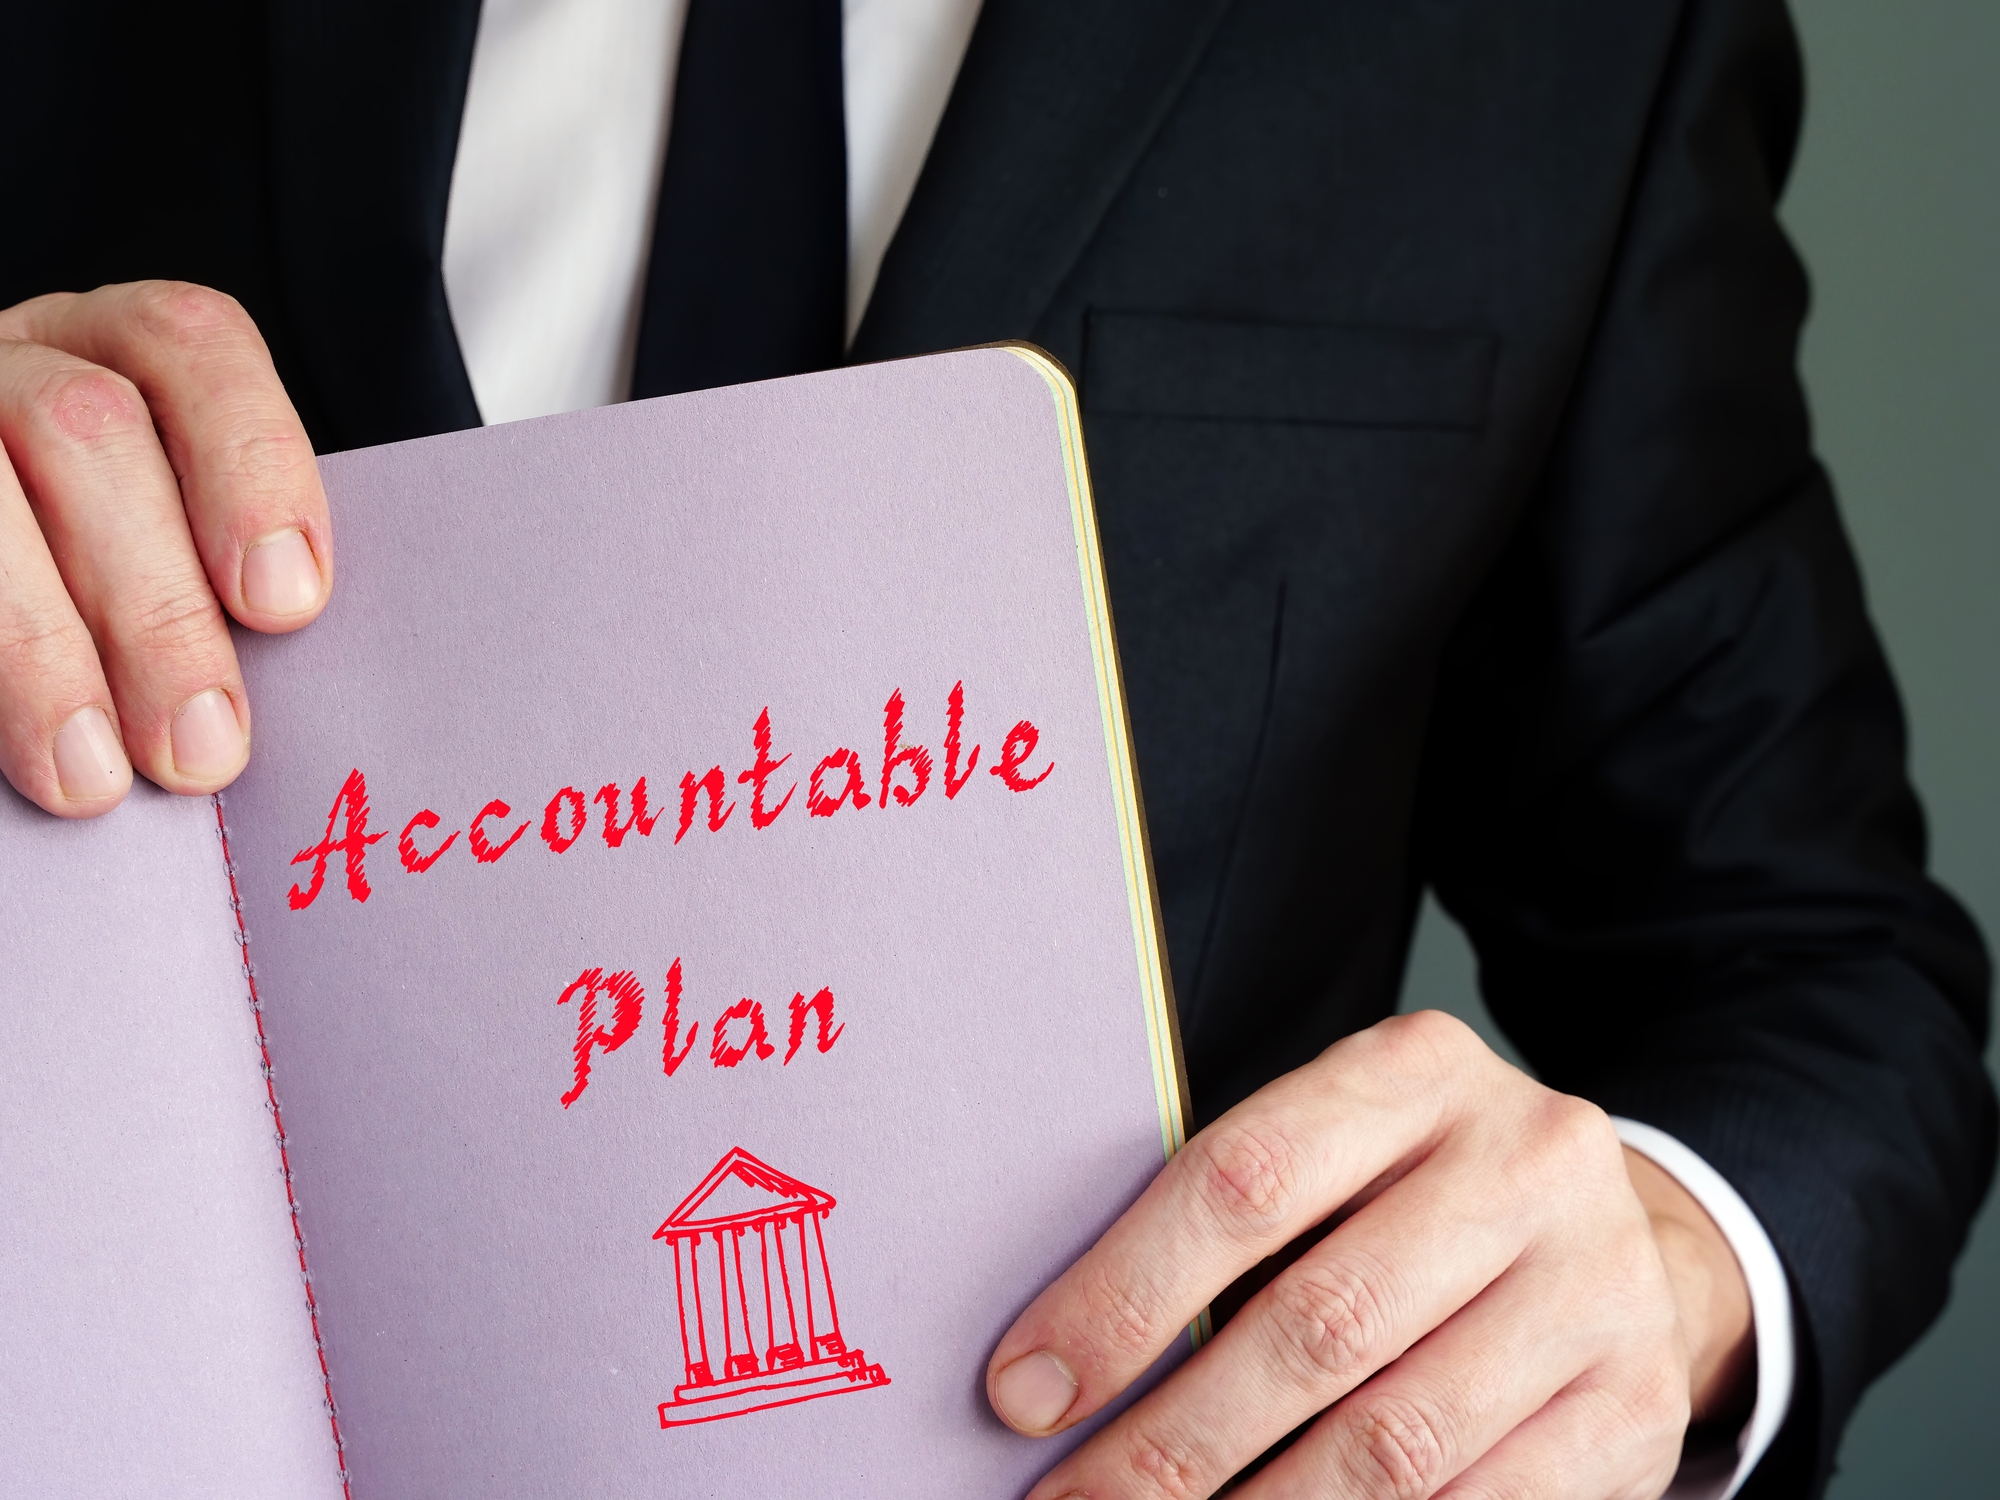 The Right Way to Run An Accountable Plan